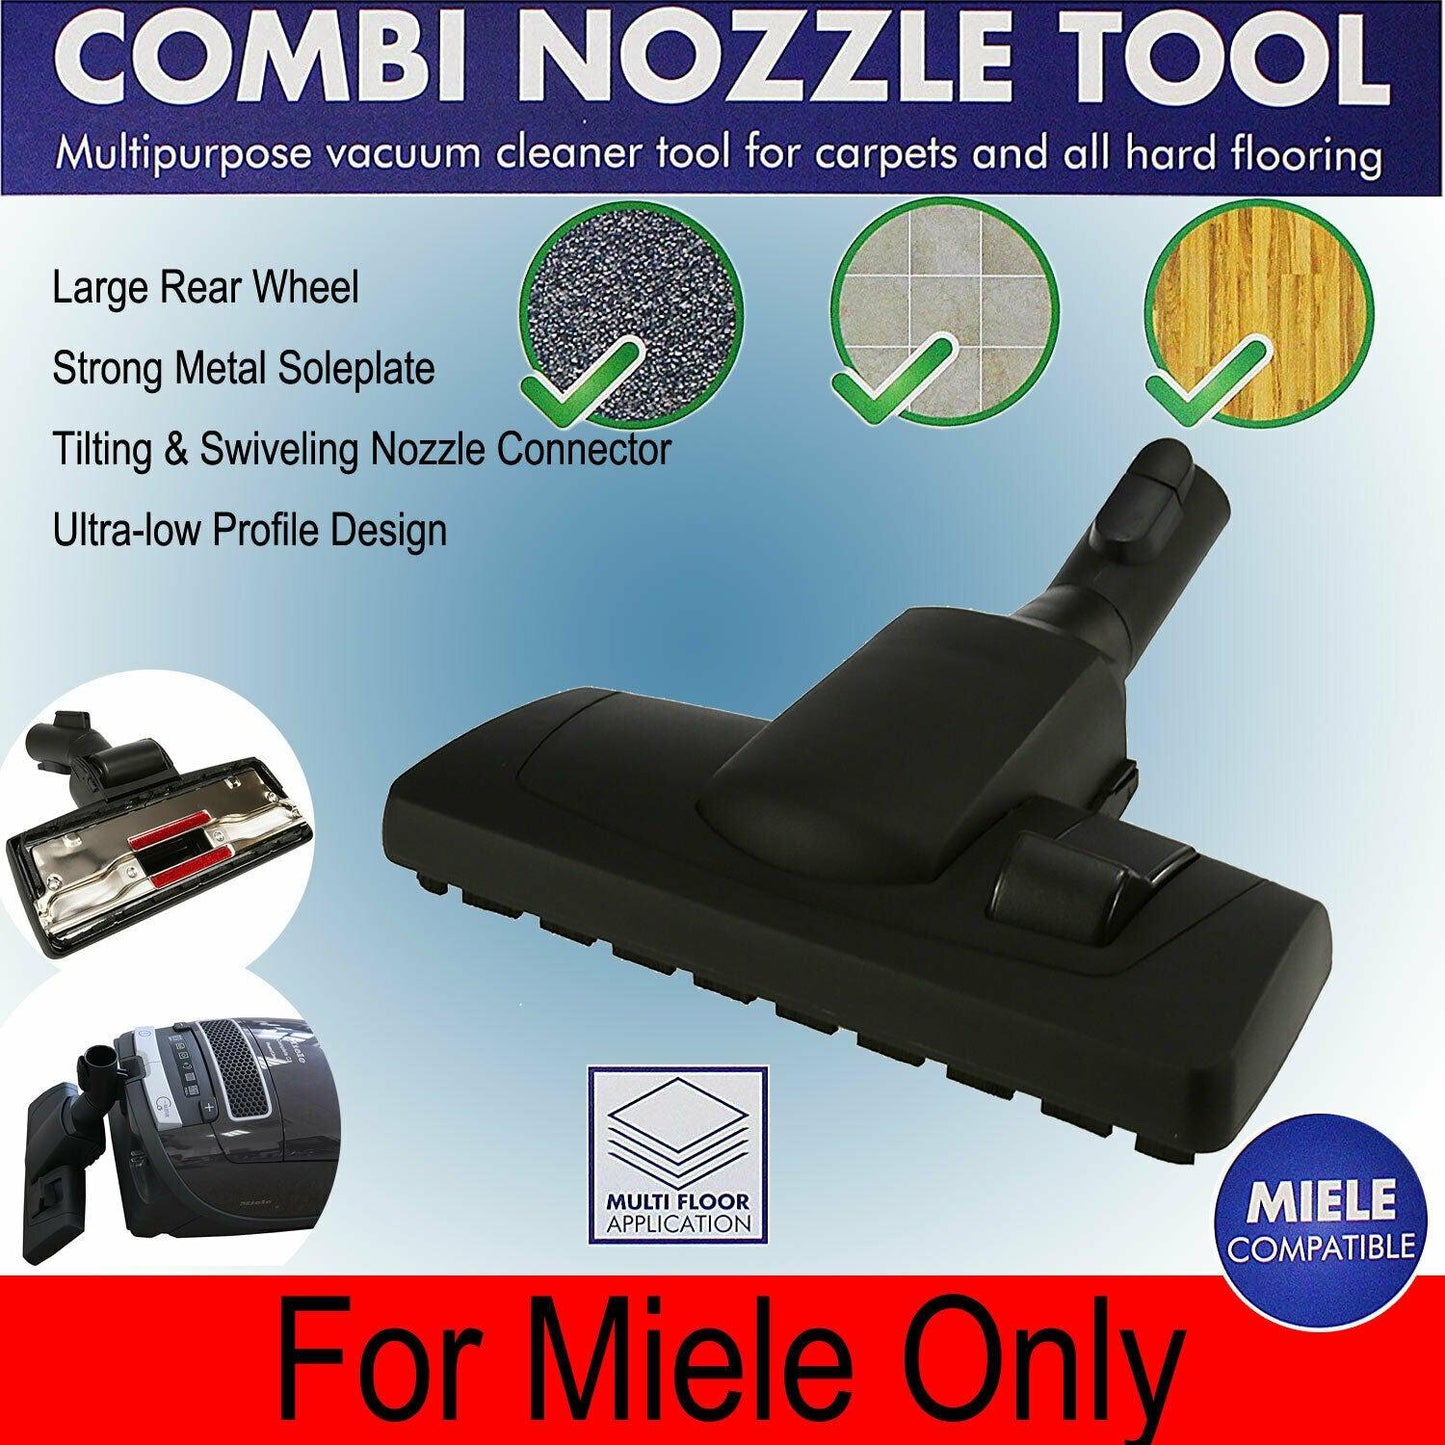 Wheeled Combination Floor Brush Tool For Miele 35mm S5780 S5781 TotalCare S5981 Sparesbarn